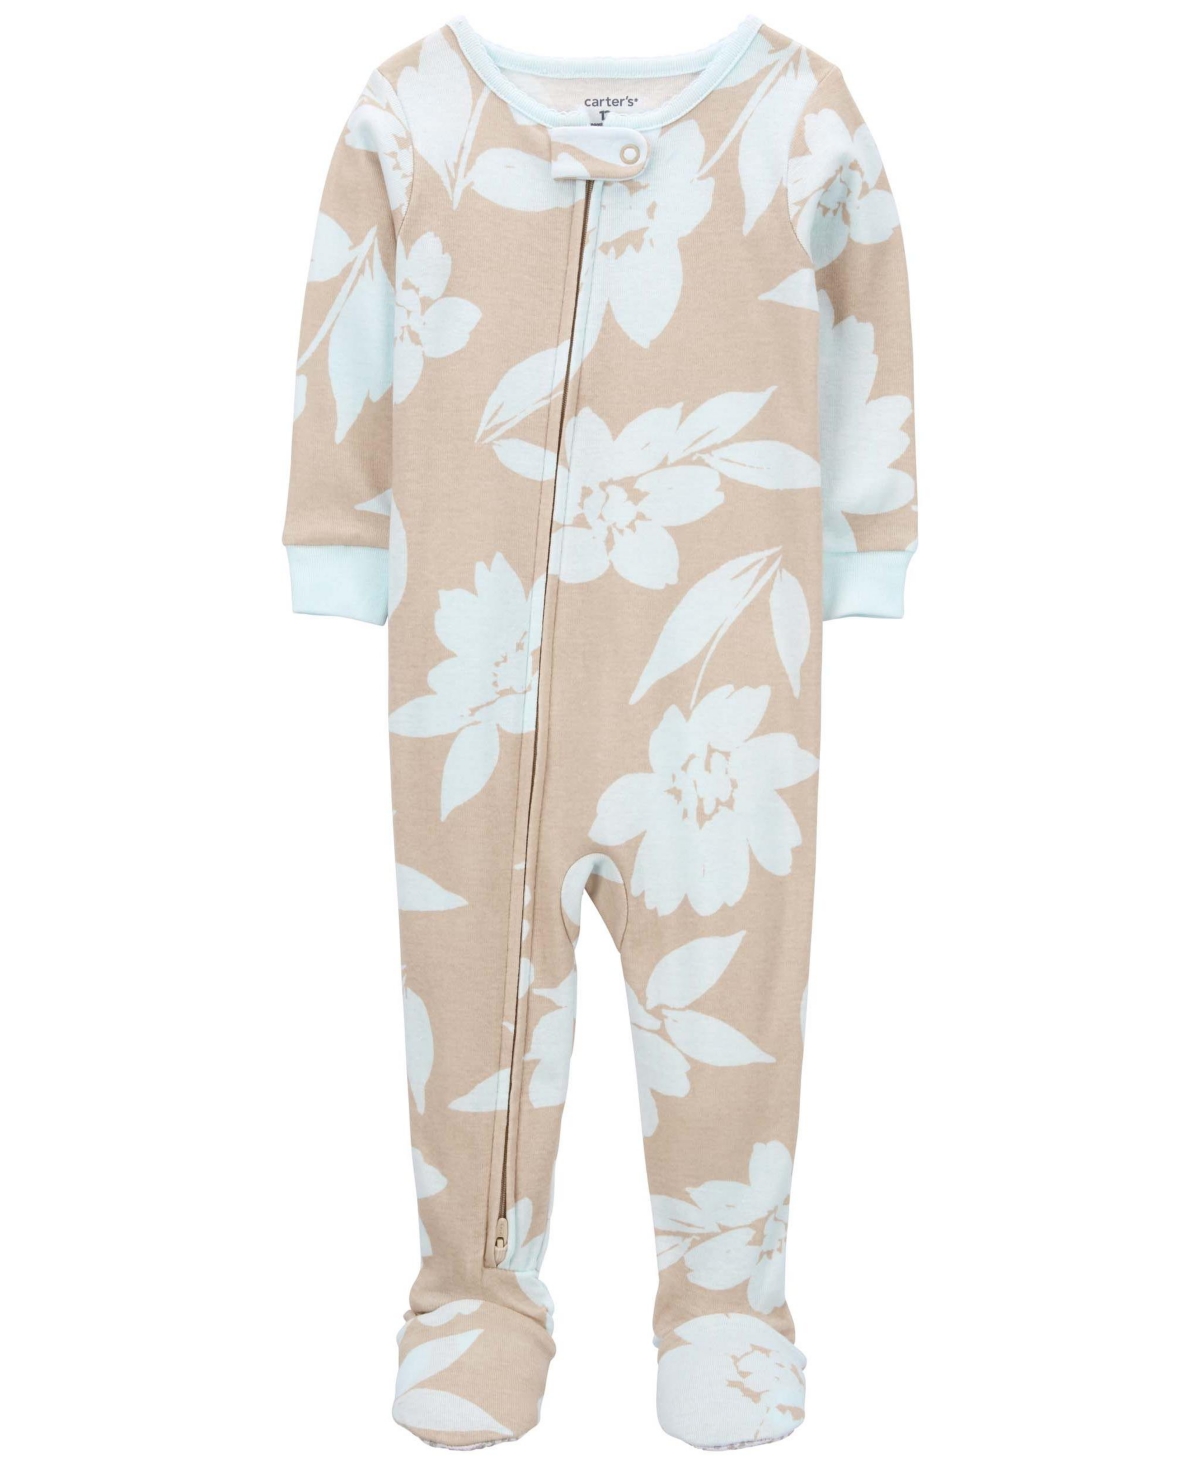 CARTER'S BABY GIRLS ONE PIECE FLORAL 100% SNUG FIT COTTON FOOTIE PAJAMAS